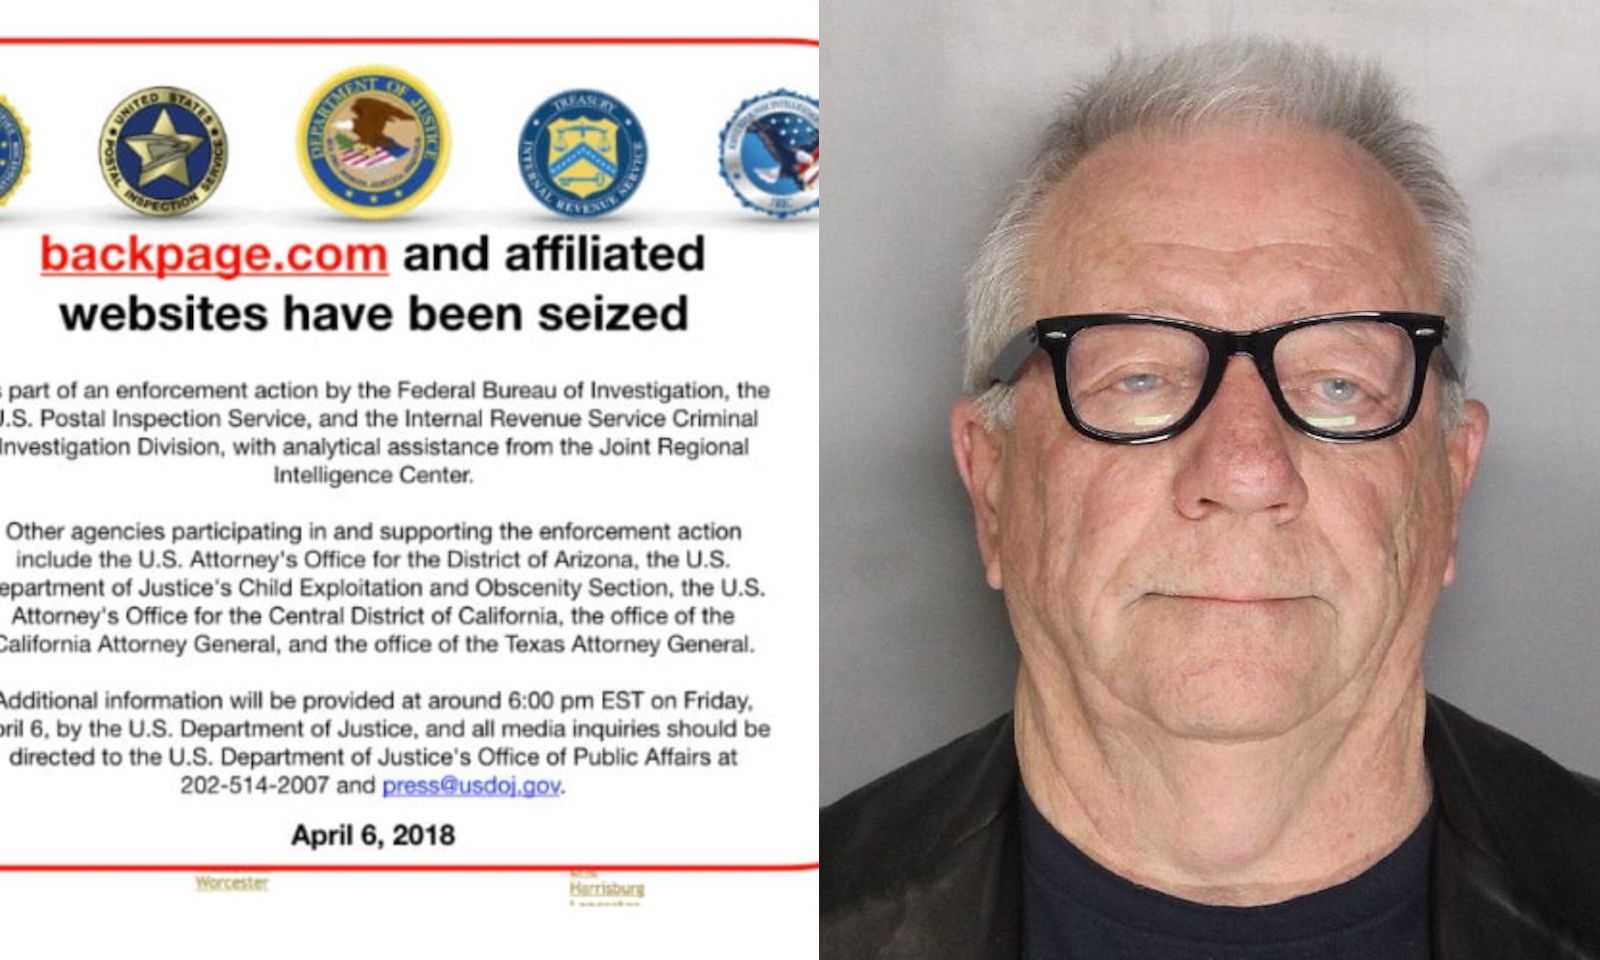 Report: Backpage Slammed With 93 Charges, Indictment Still Sealed